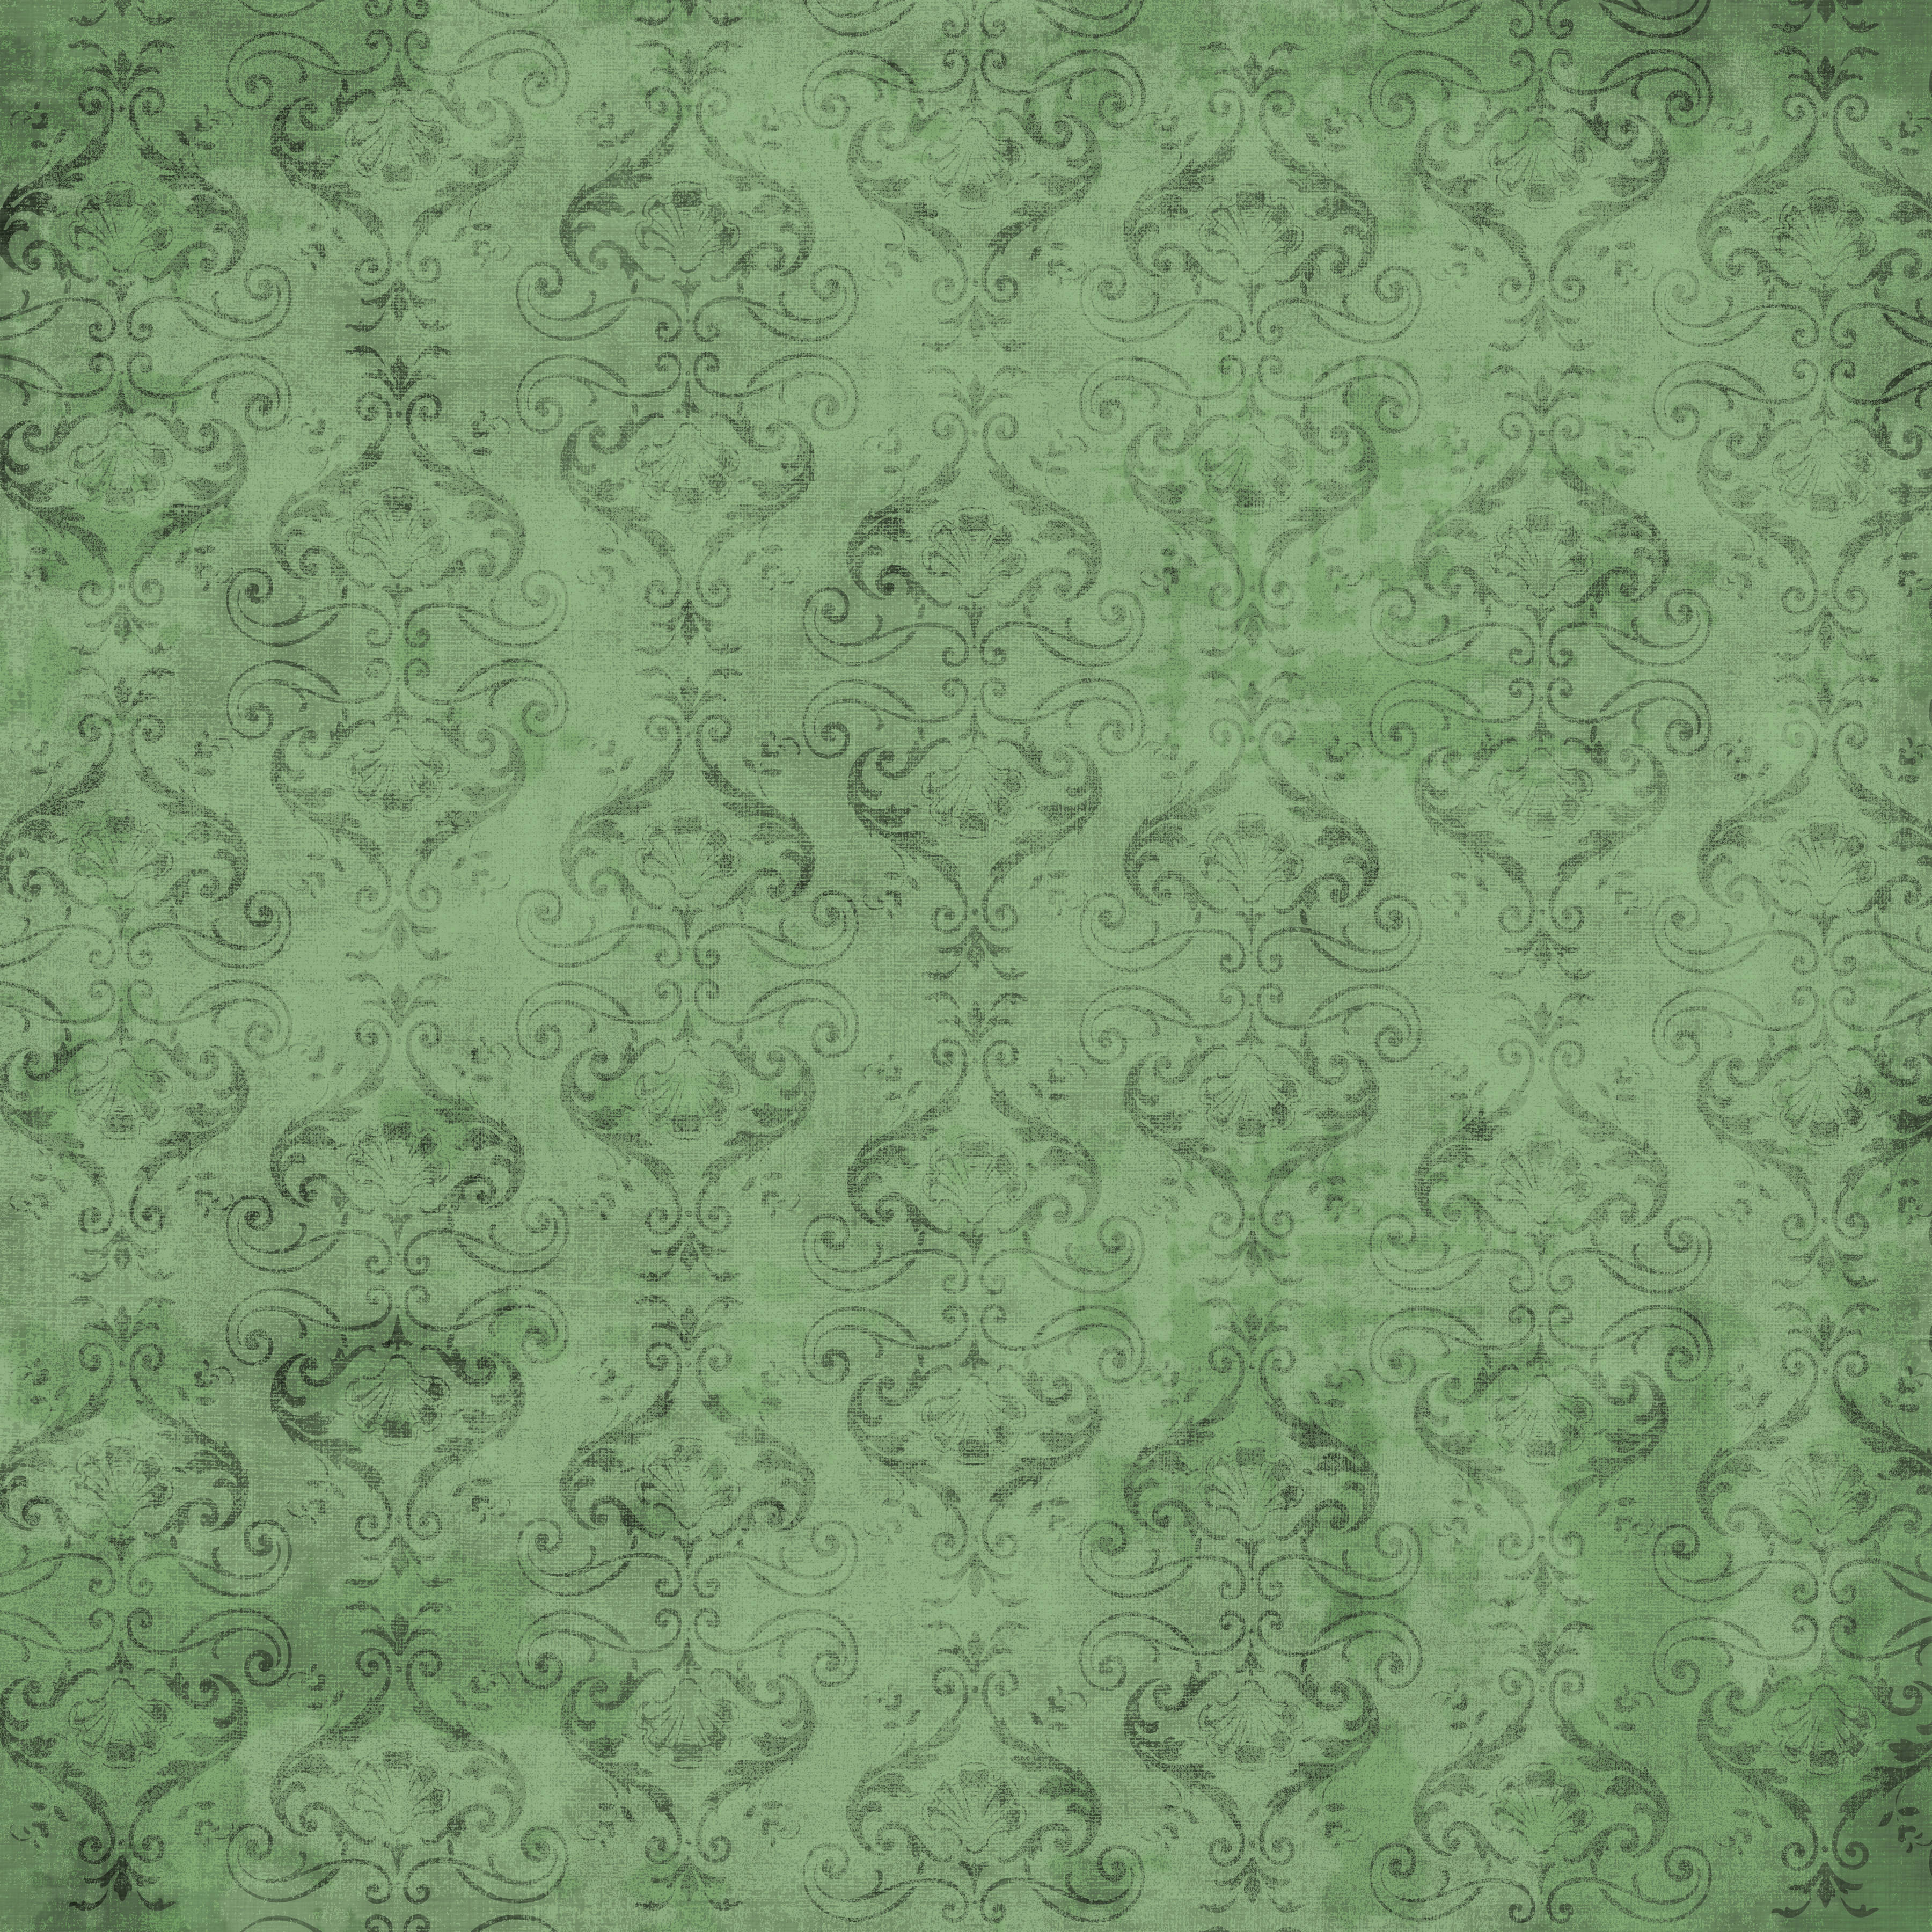 Damask Green Paper June In The Park Digital Scrapbooking Kit By